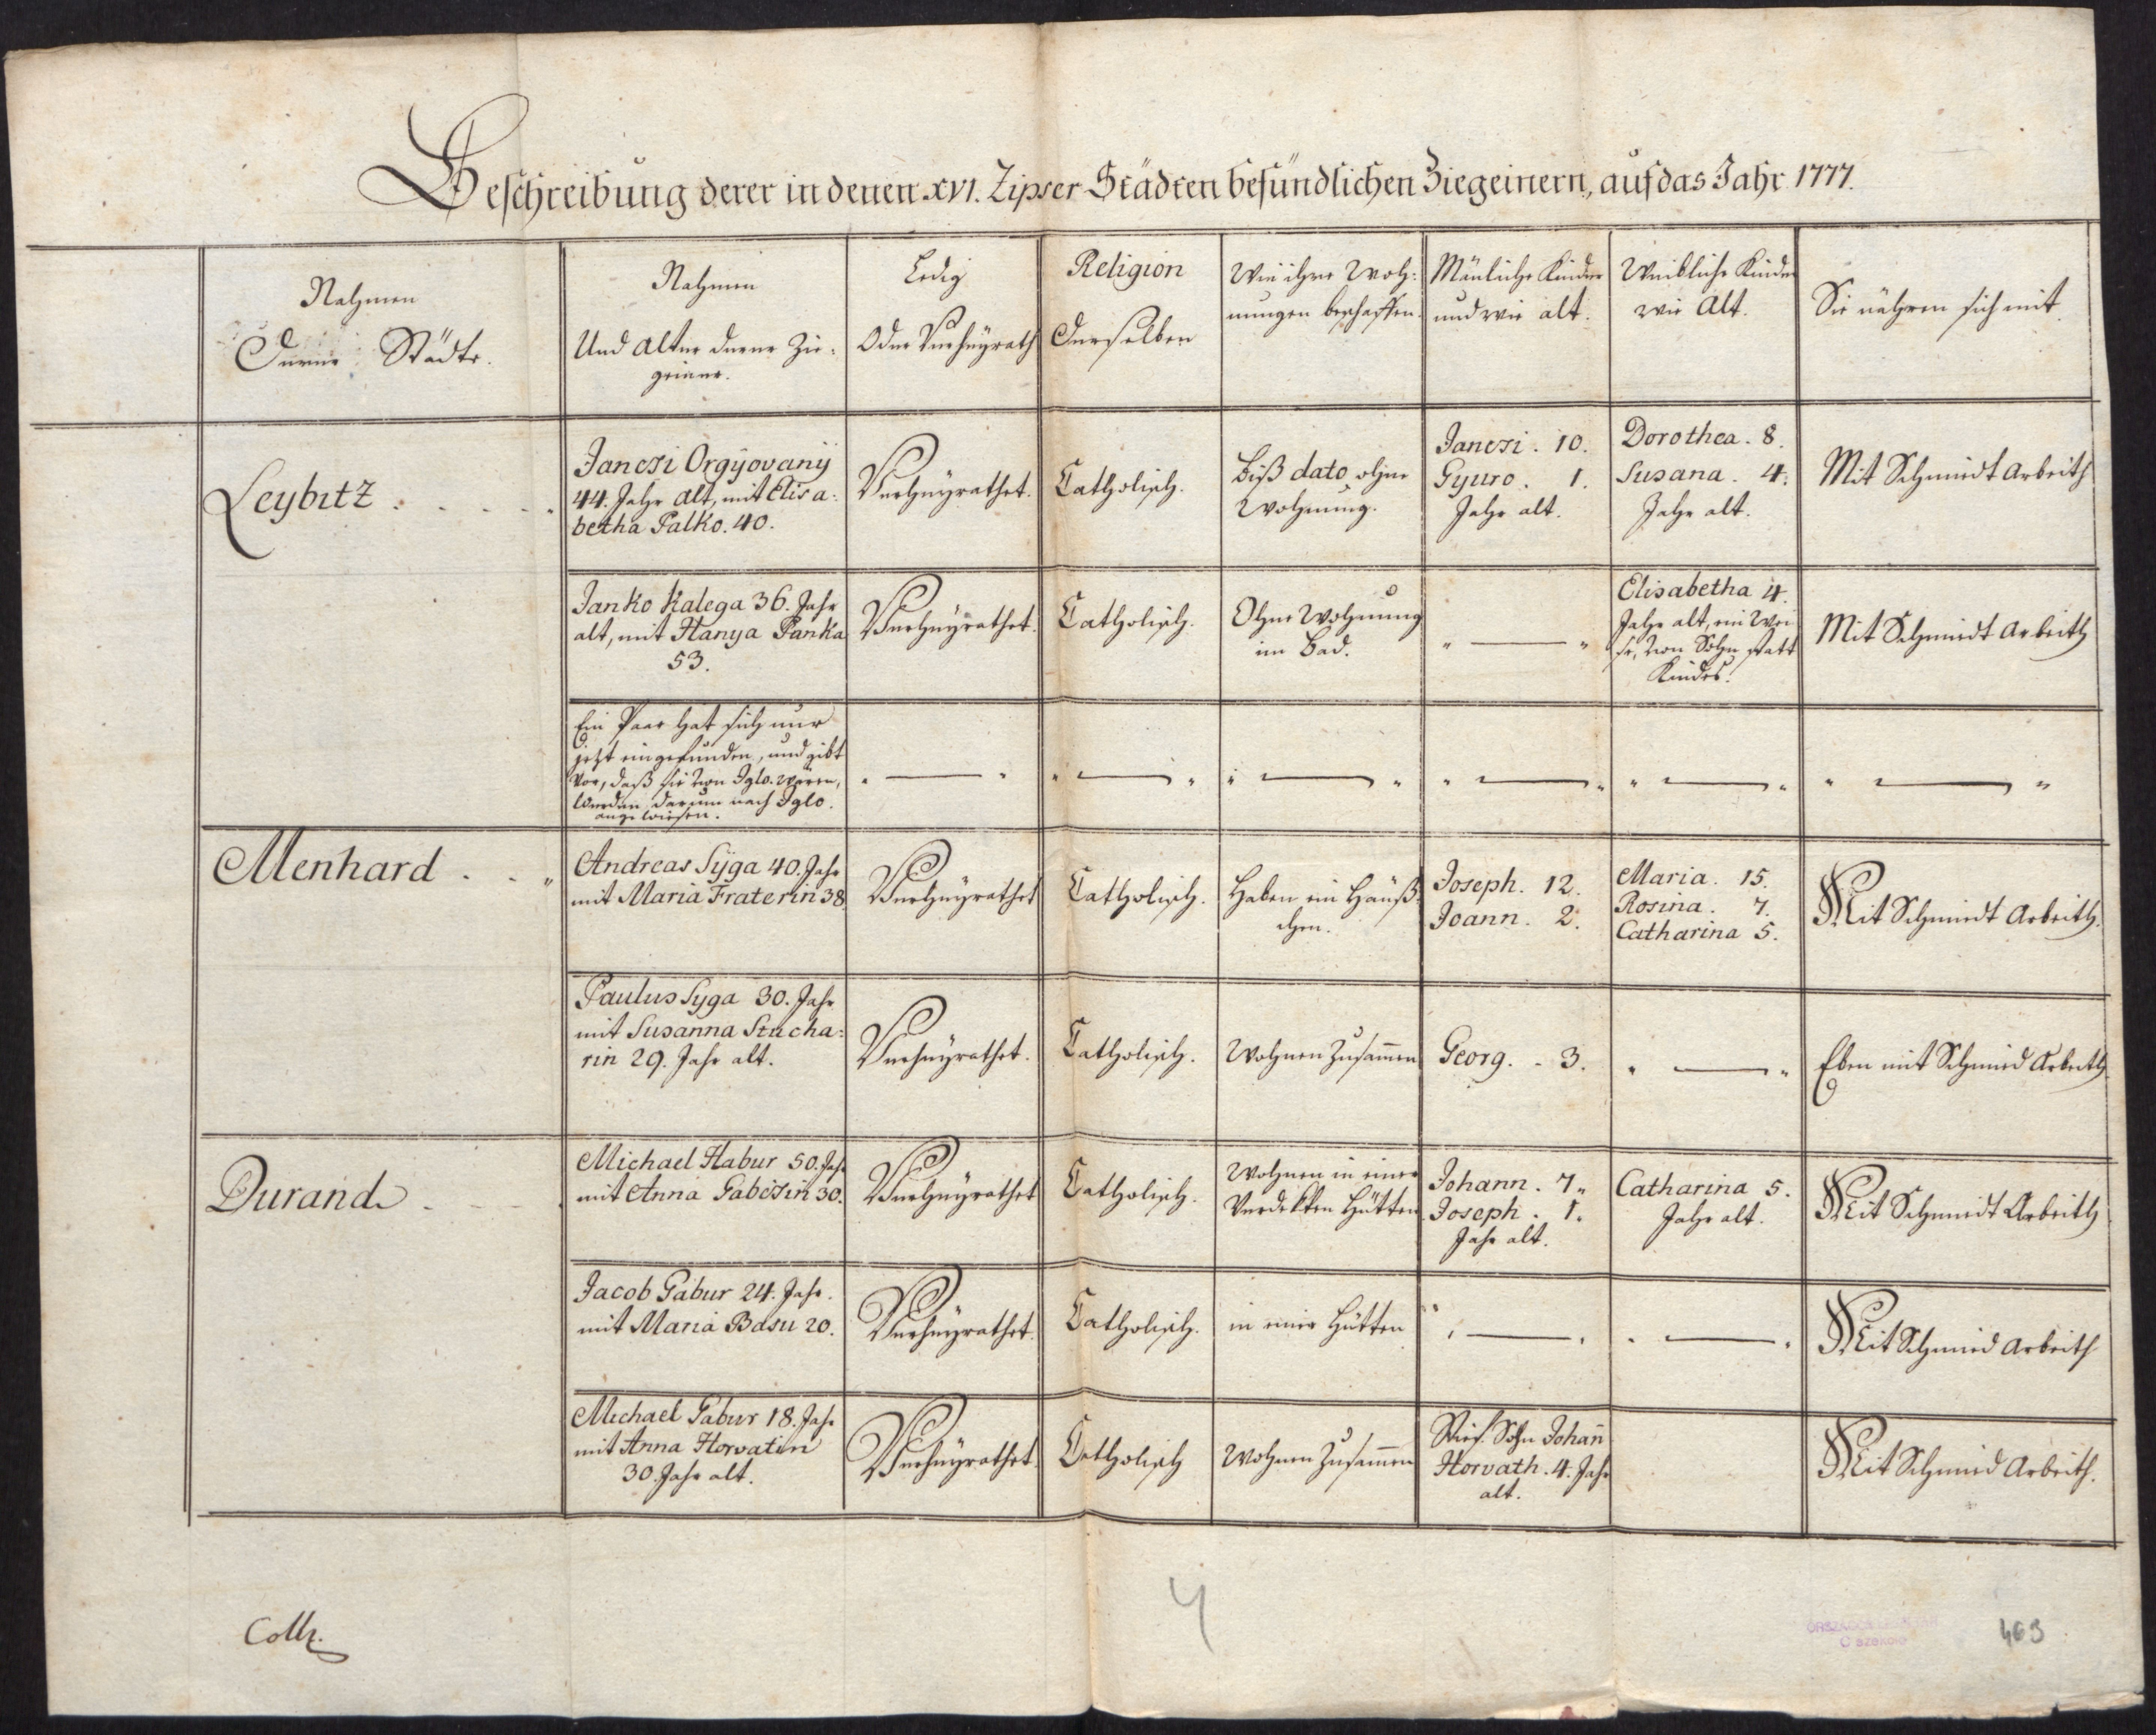 Magyar Nemzeti Levéltár, census sheet of the Roma population of the 16 towns of the Spiš region (now Slovakia) from 1777